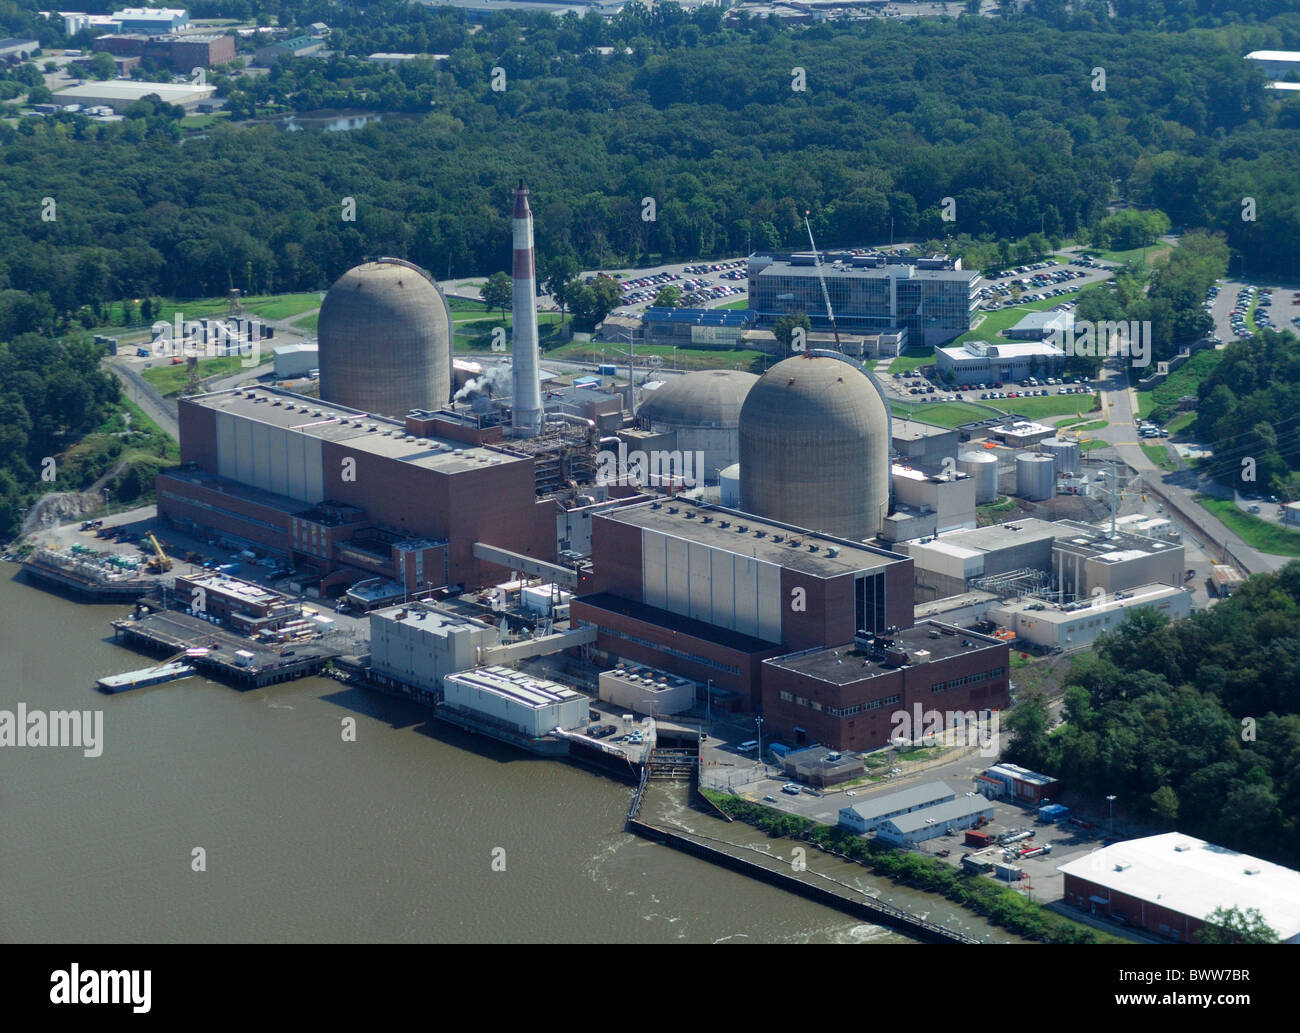 Aerial view of nuclear power plant Indian Point Energy Center on Hudson river, Buchanan, New York state, USA Stock Photo